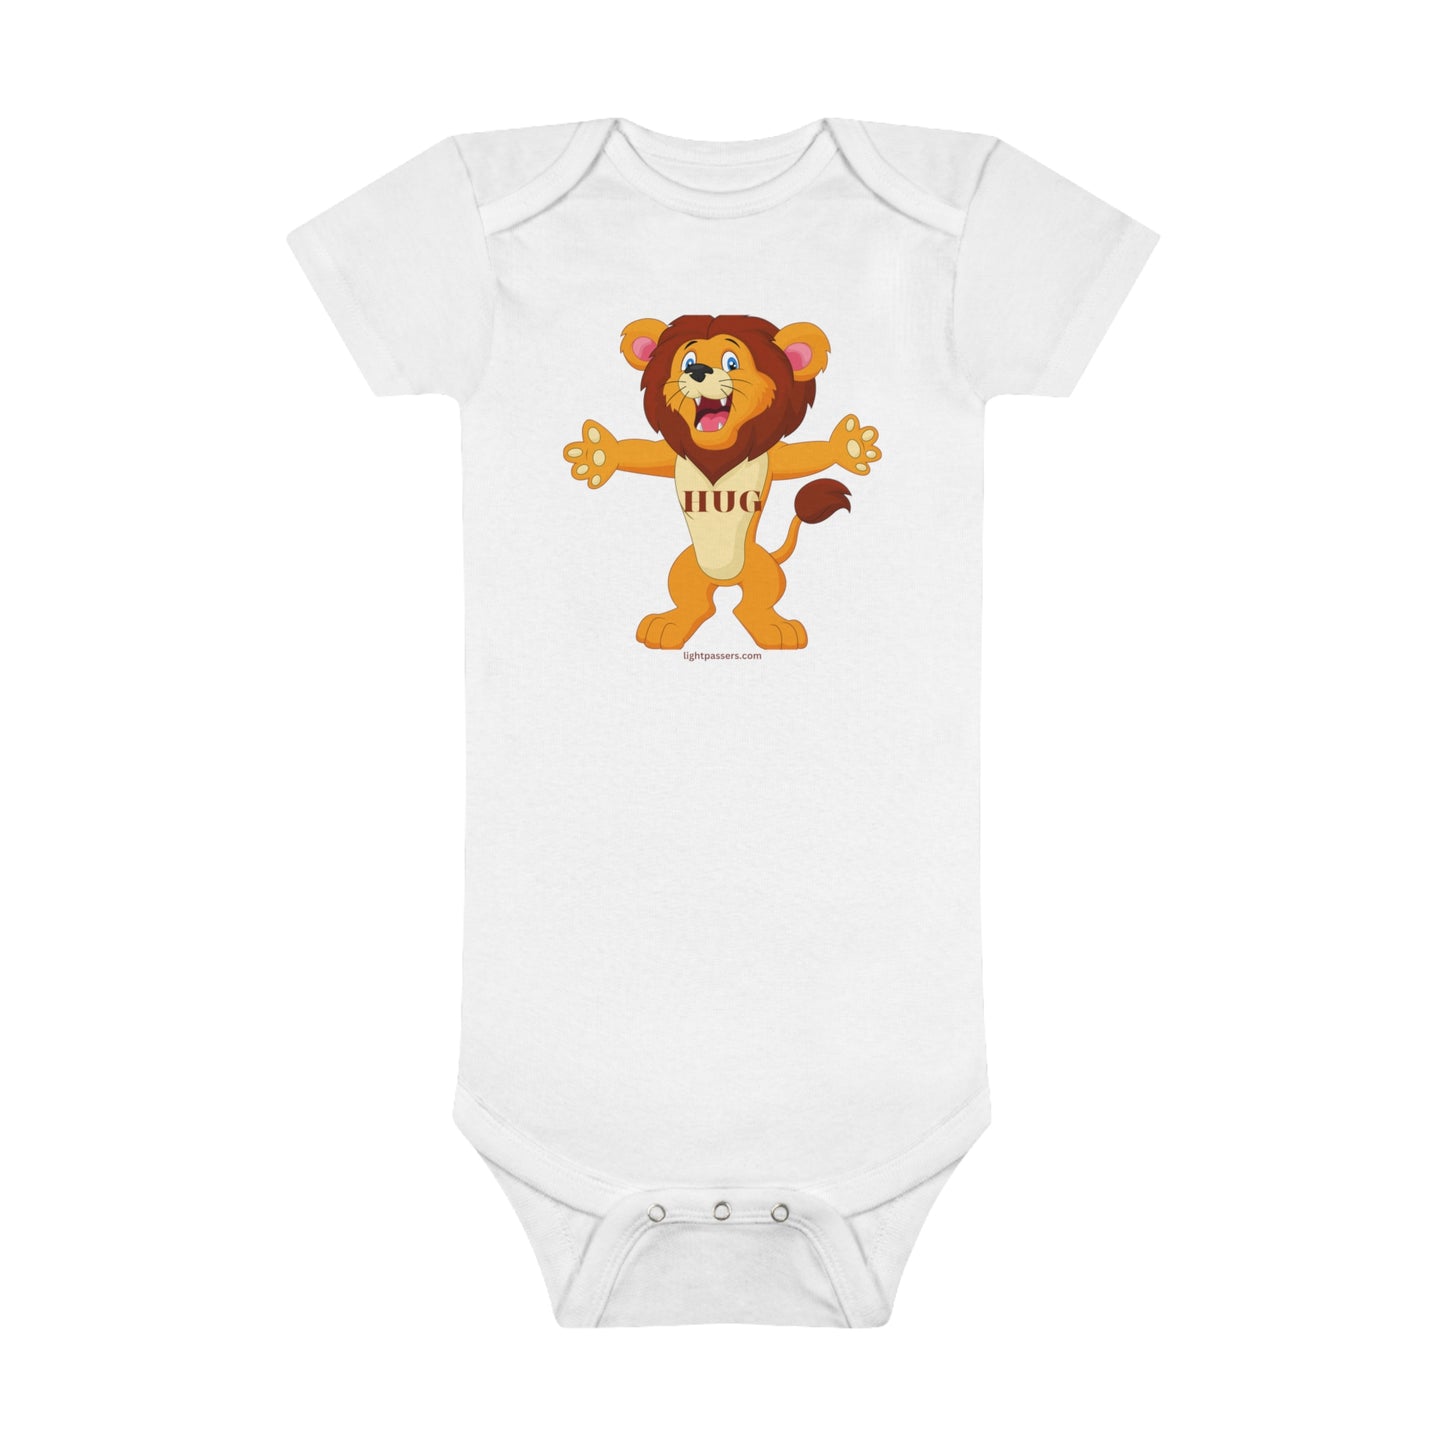 Light Passers Marketplace Lion Hug Baby Short Sleeve Onesie® T-shirts, Simple Messages, Mental Health